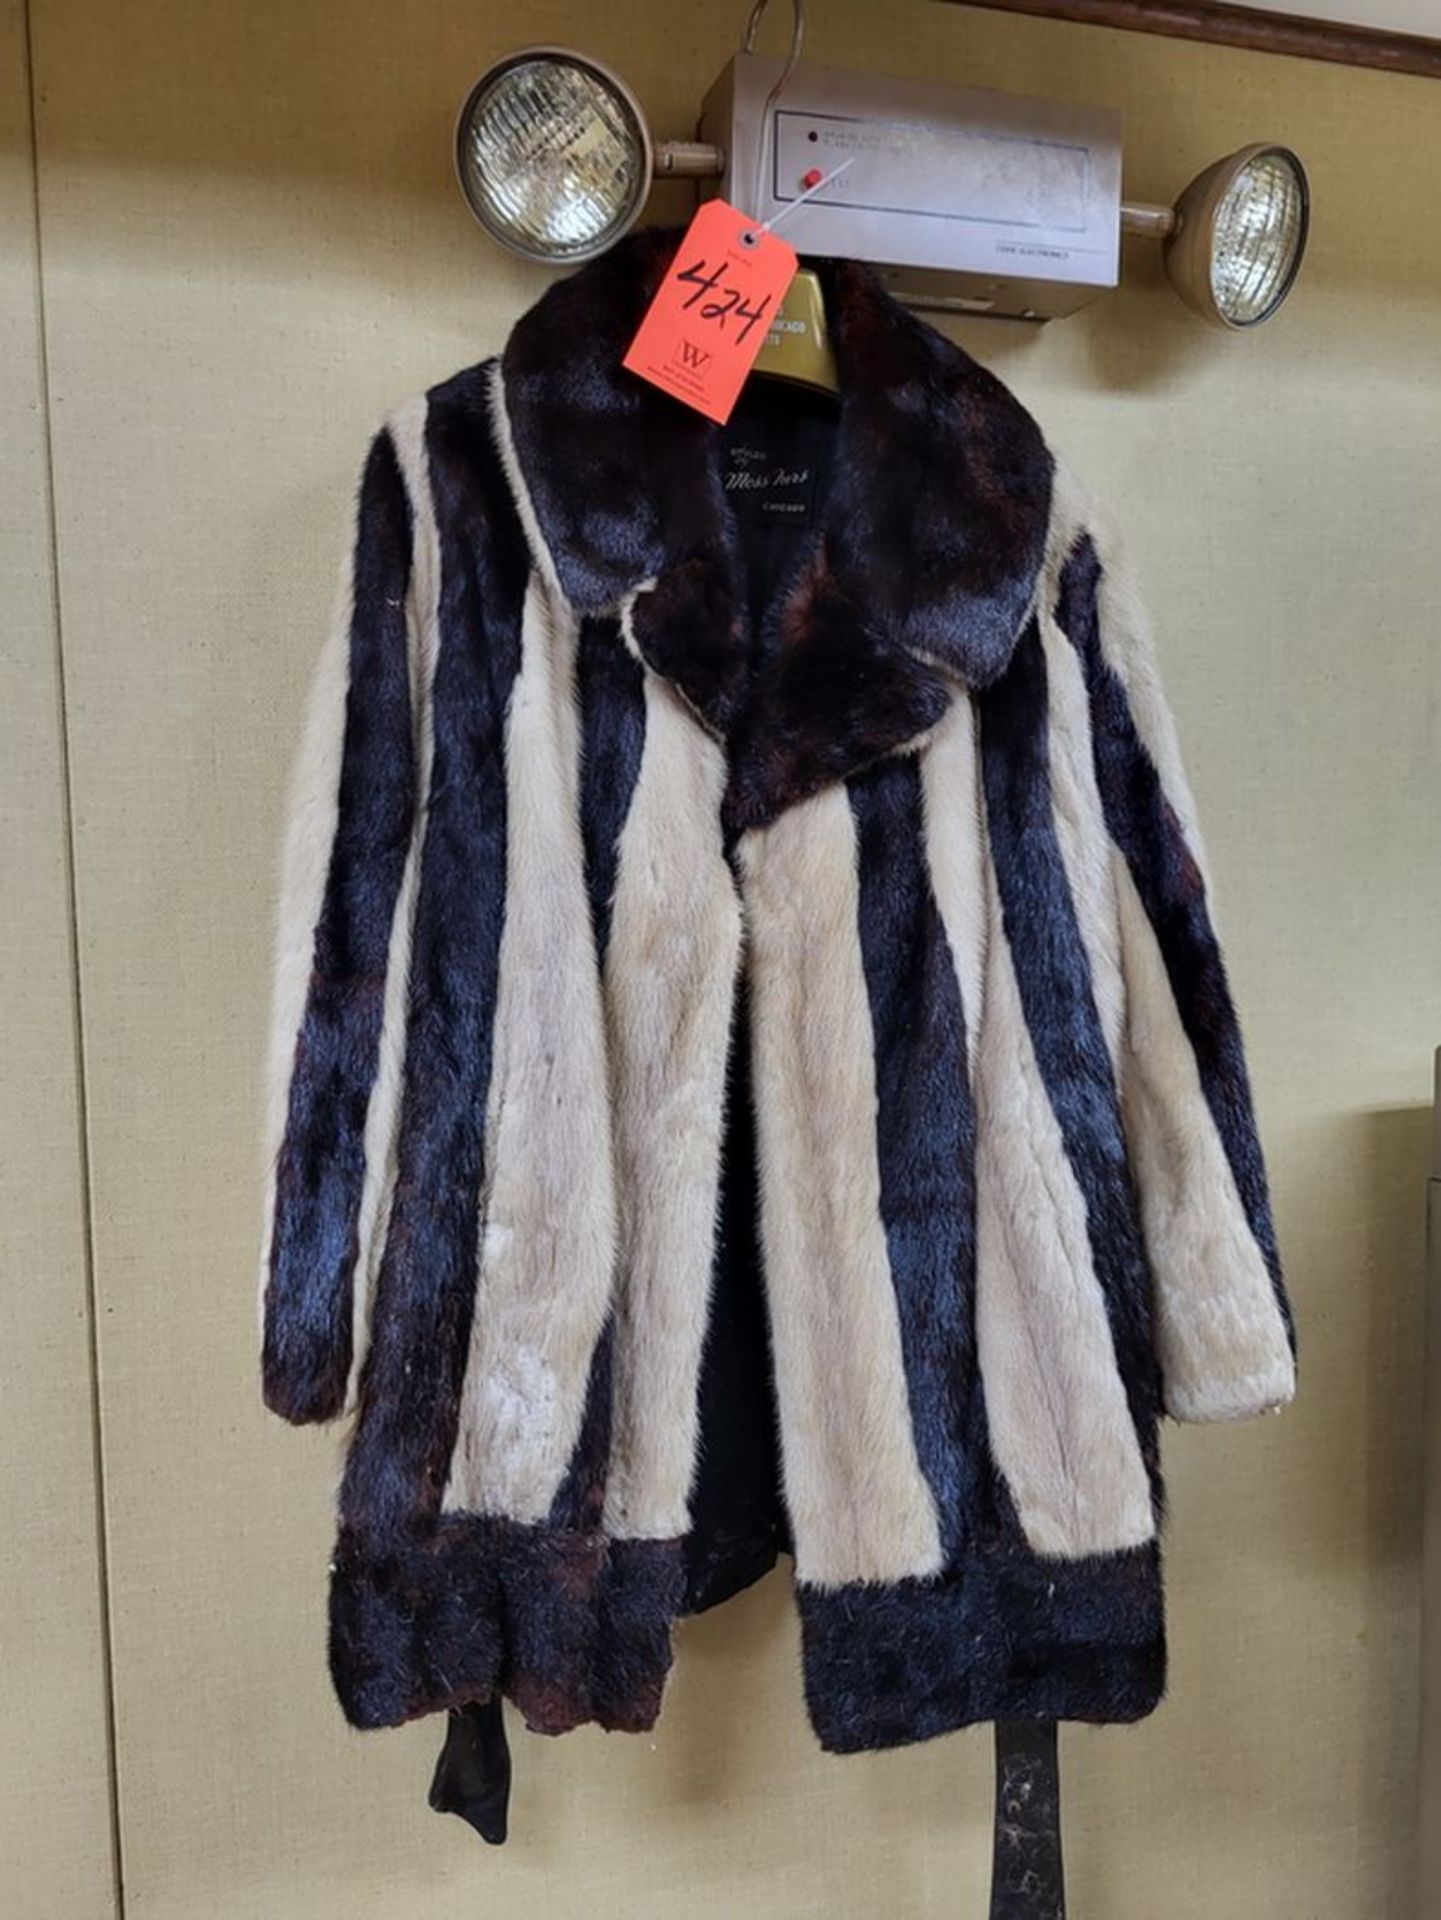 Fur Coat, "Styled by Moss Furs, Chicago" - Real Mink Fur Jacket, Possibly 70's Vintage (